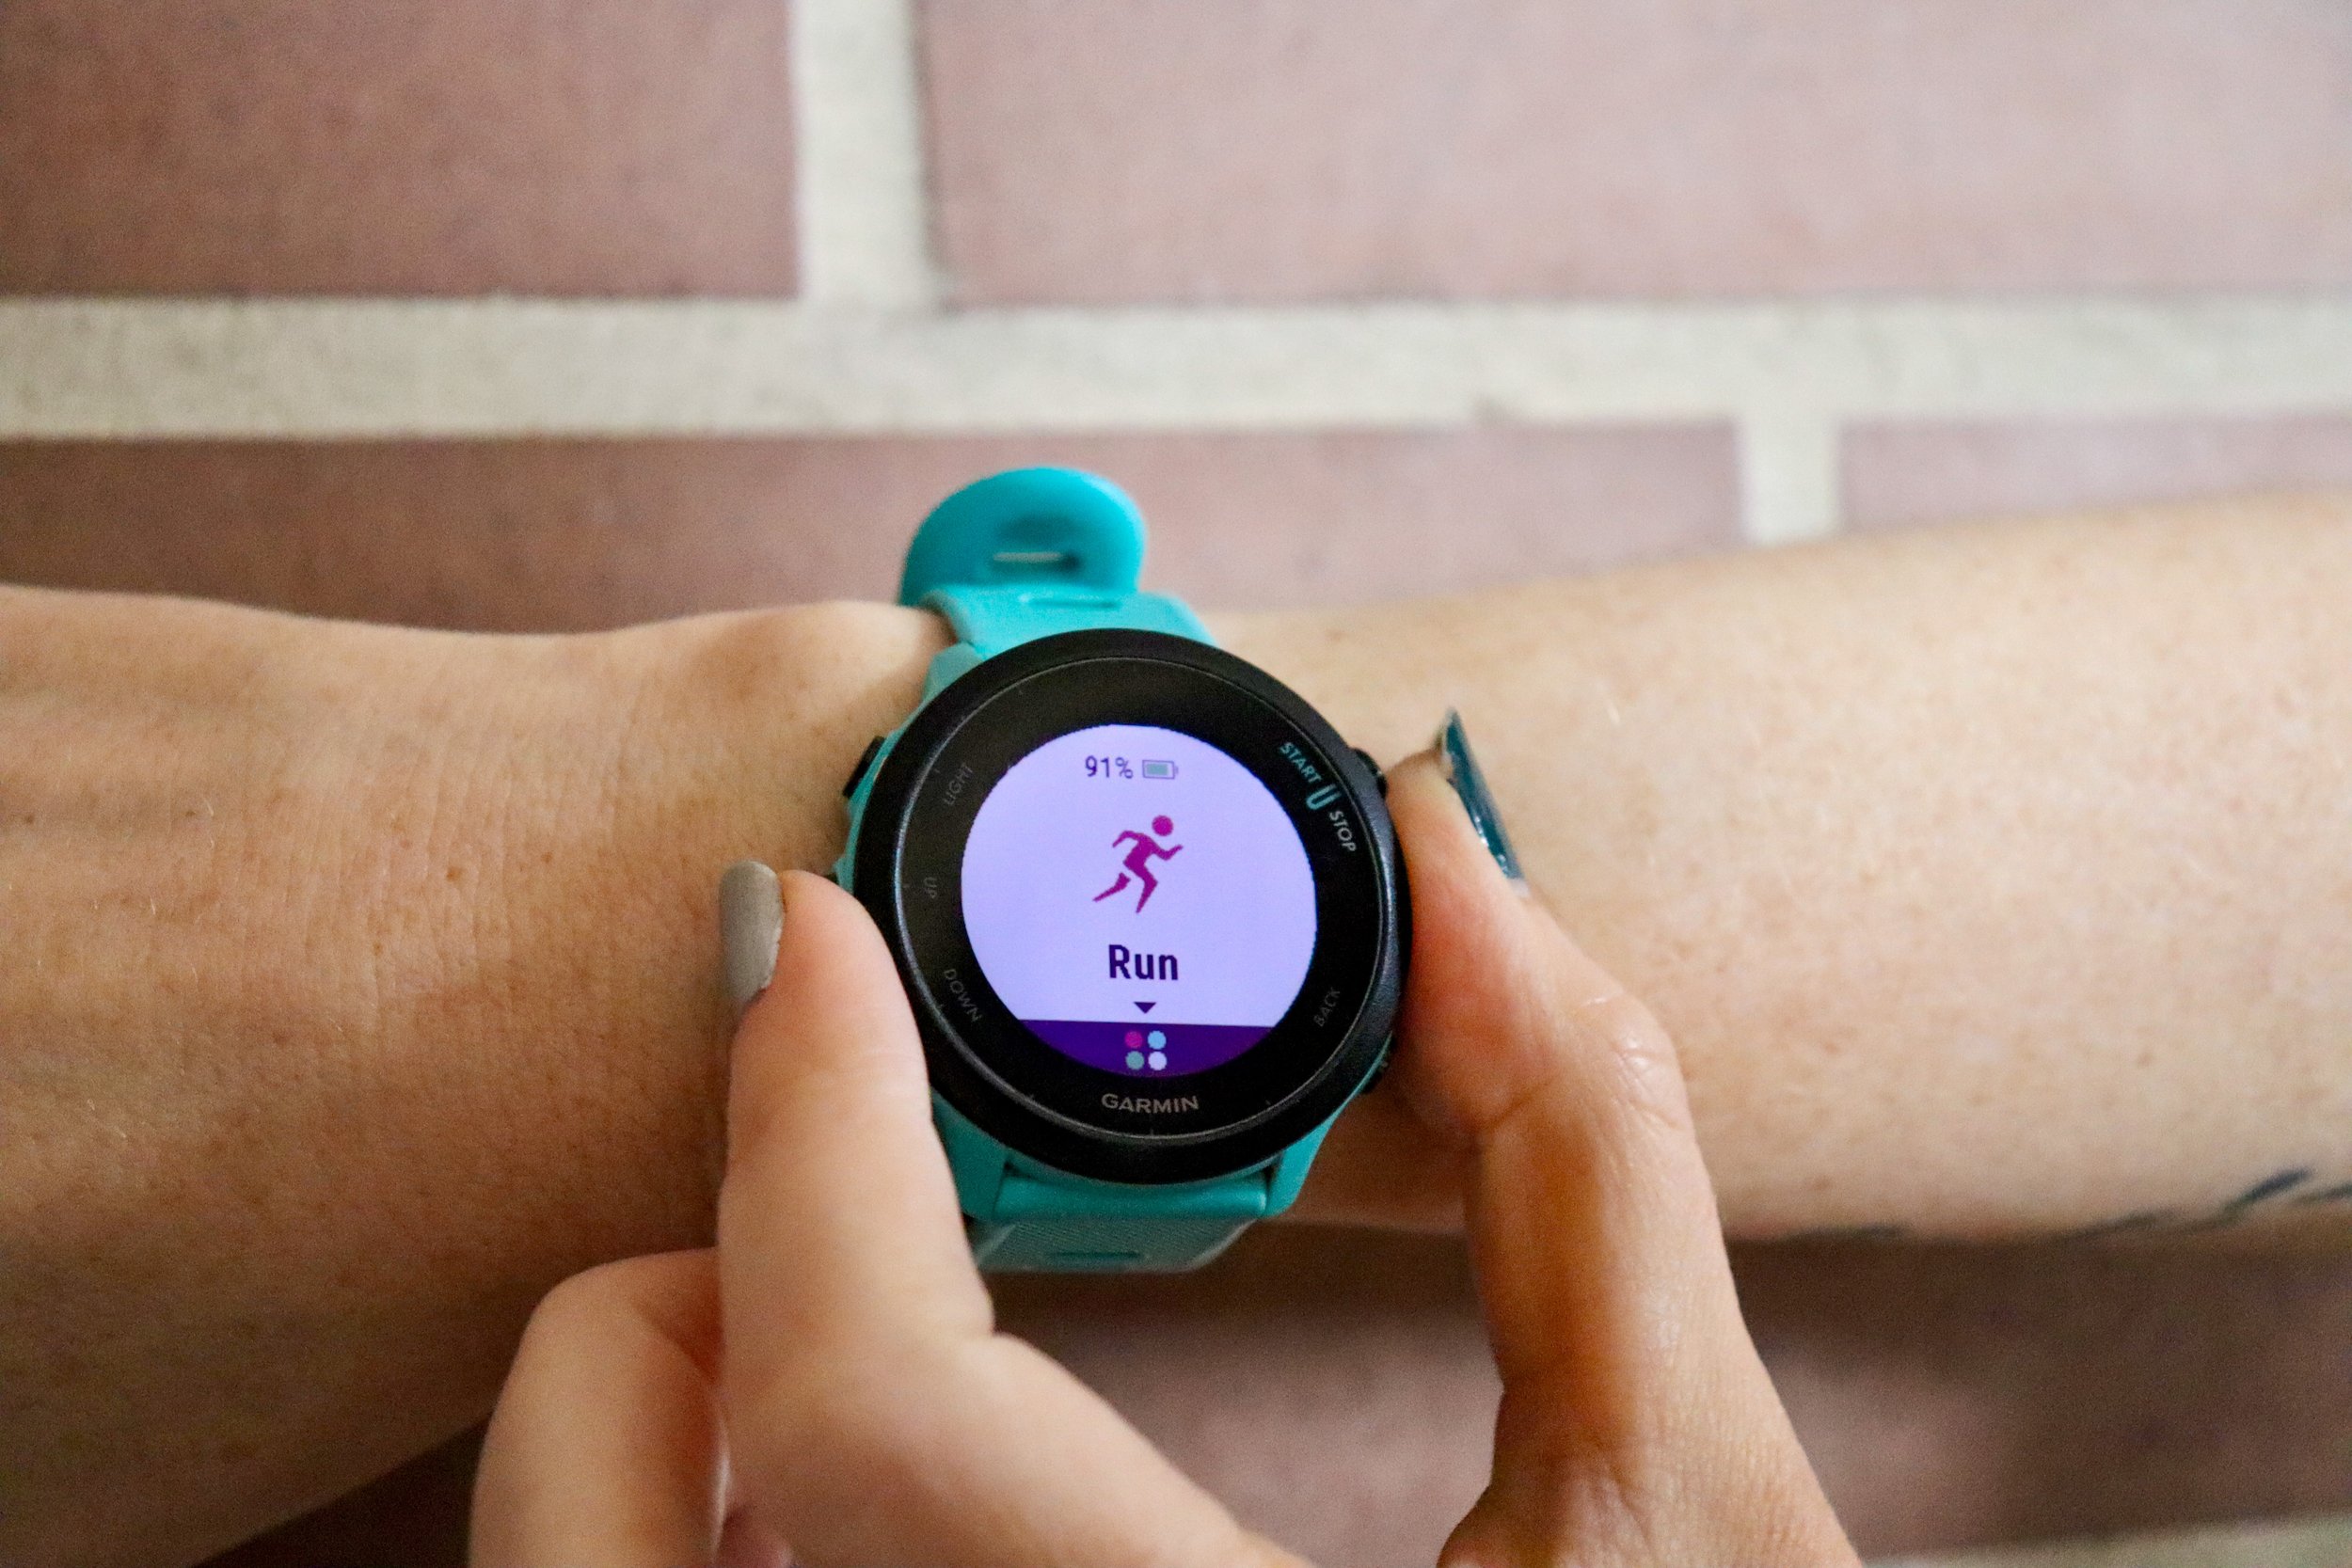 Garmin Forerunner 45 GPS Running Watch With Great Features - Review